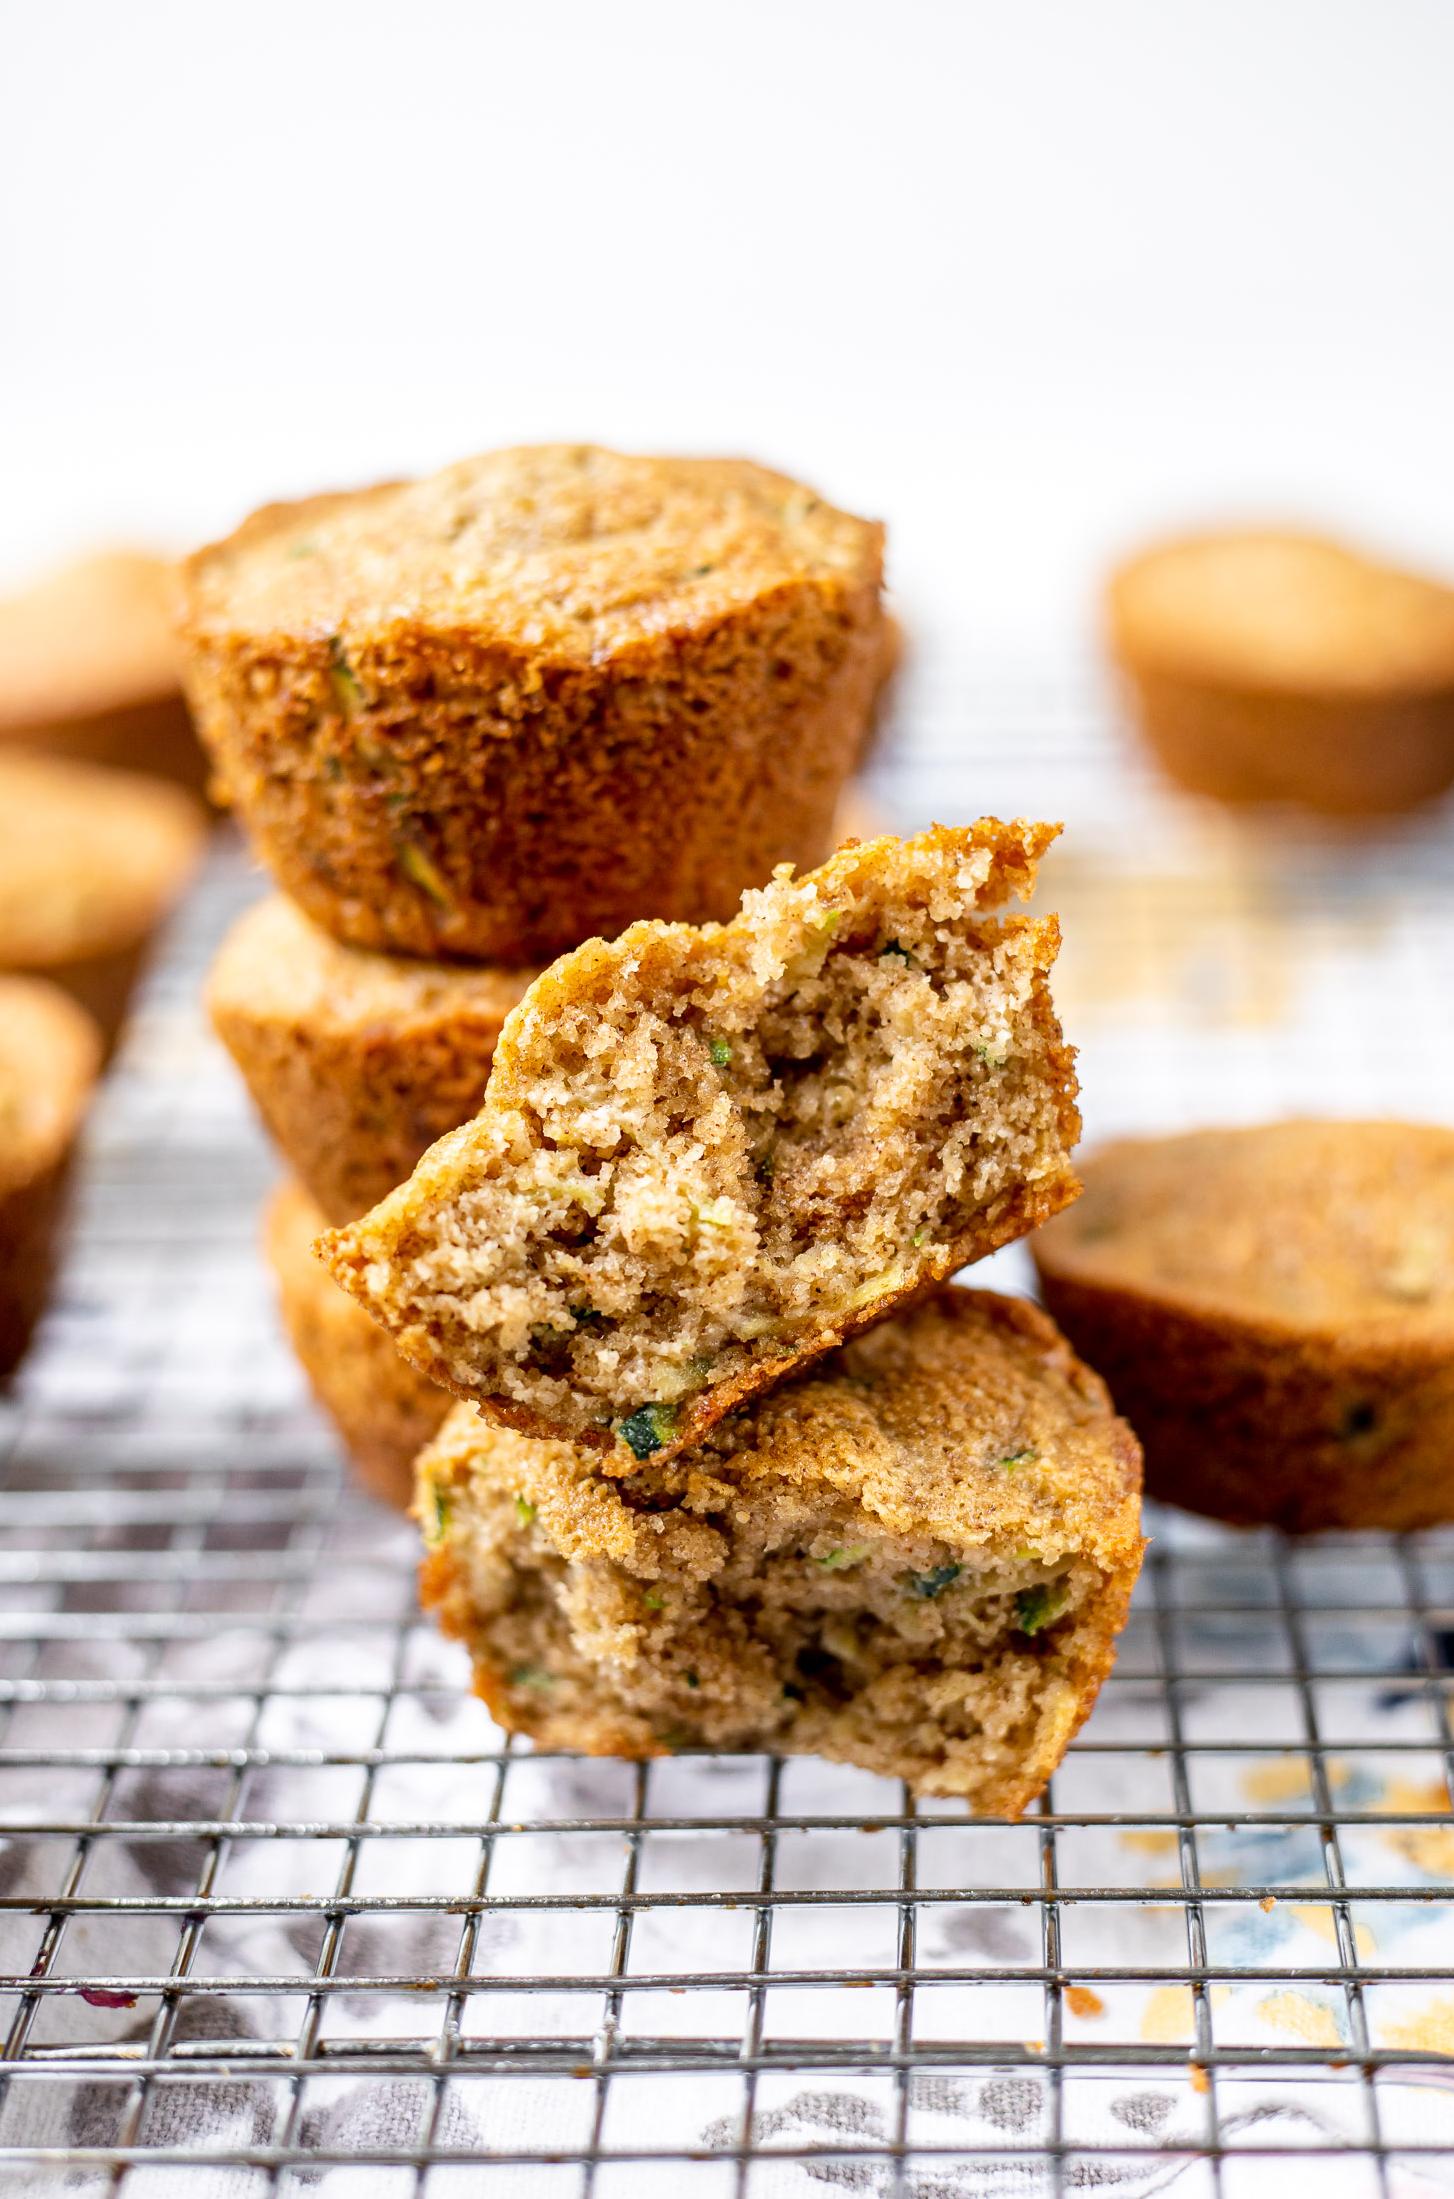  These muffins are the perfect healthy snack for any time of day.